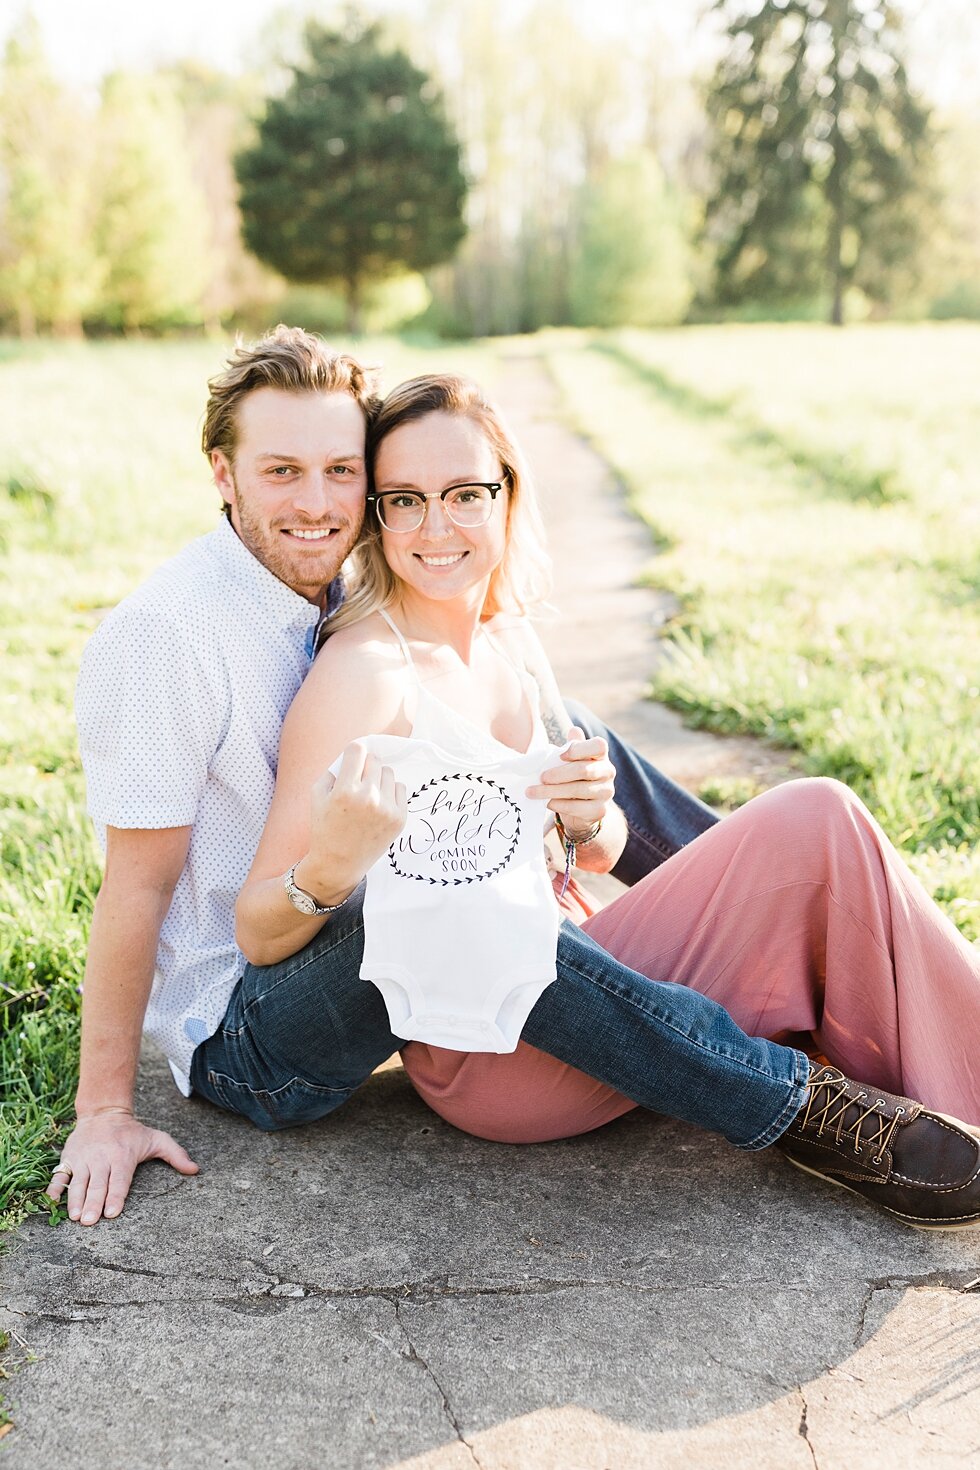  Smiling with a cute onesie for their baby who is on the way! announcement for a southern spring session. couple baby on the way expecting excited maternity photography congratulations announcement baby coming soon #padbl #padblmaternity #padblmatern